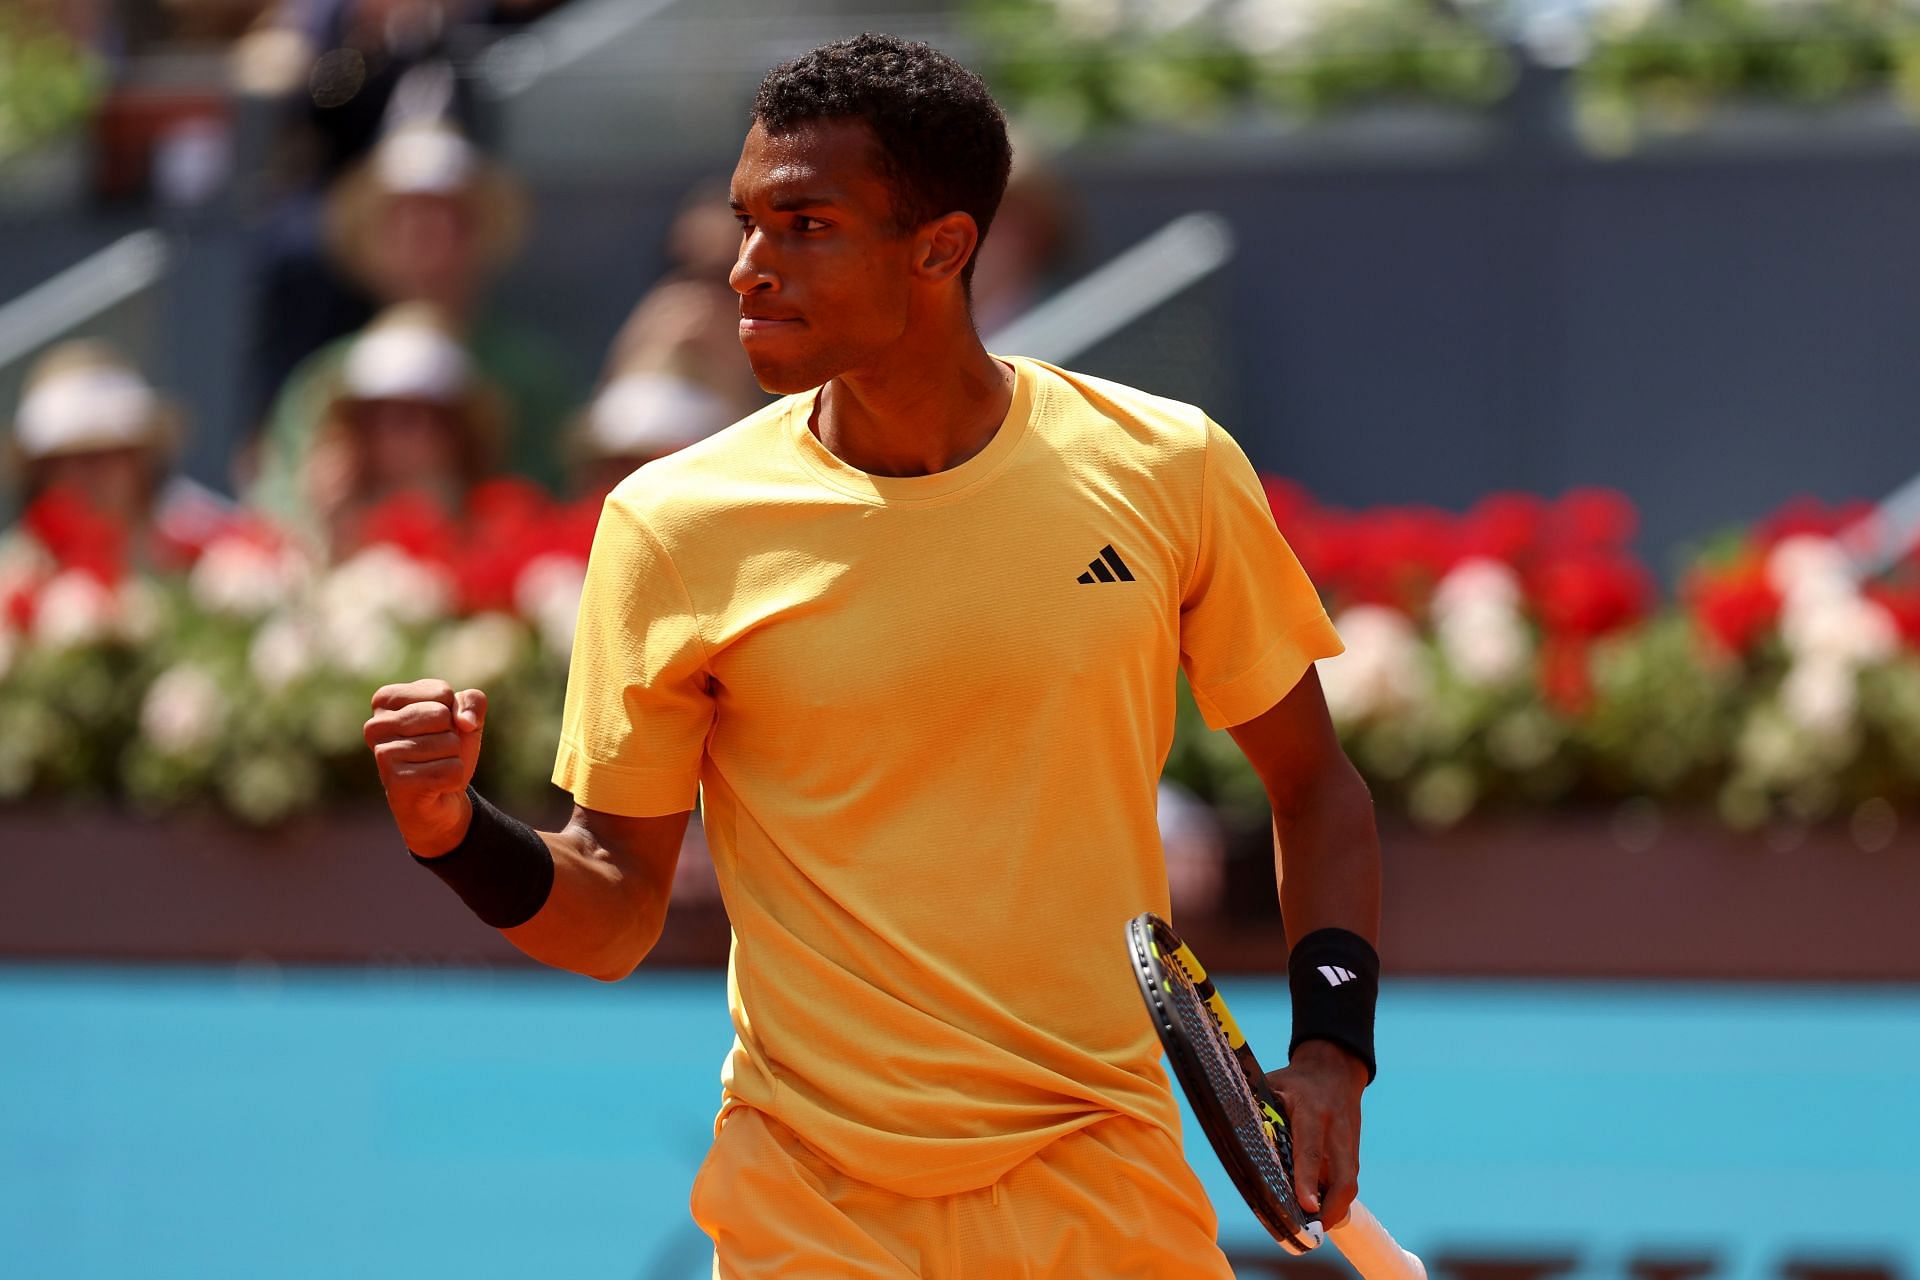 Felix Auger-Aliassime at the Mutua Madrid Open - Day Three